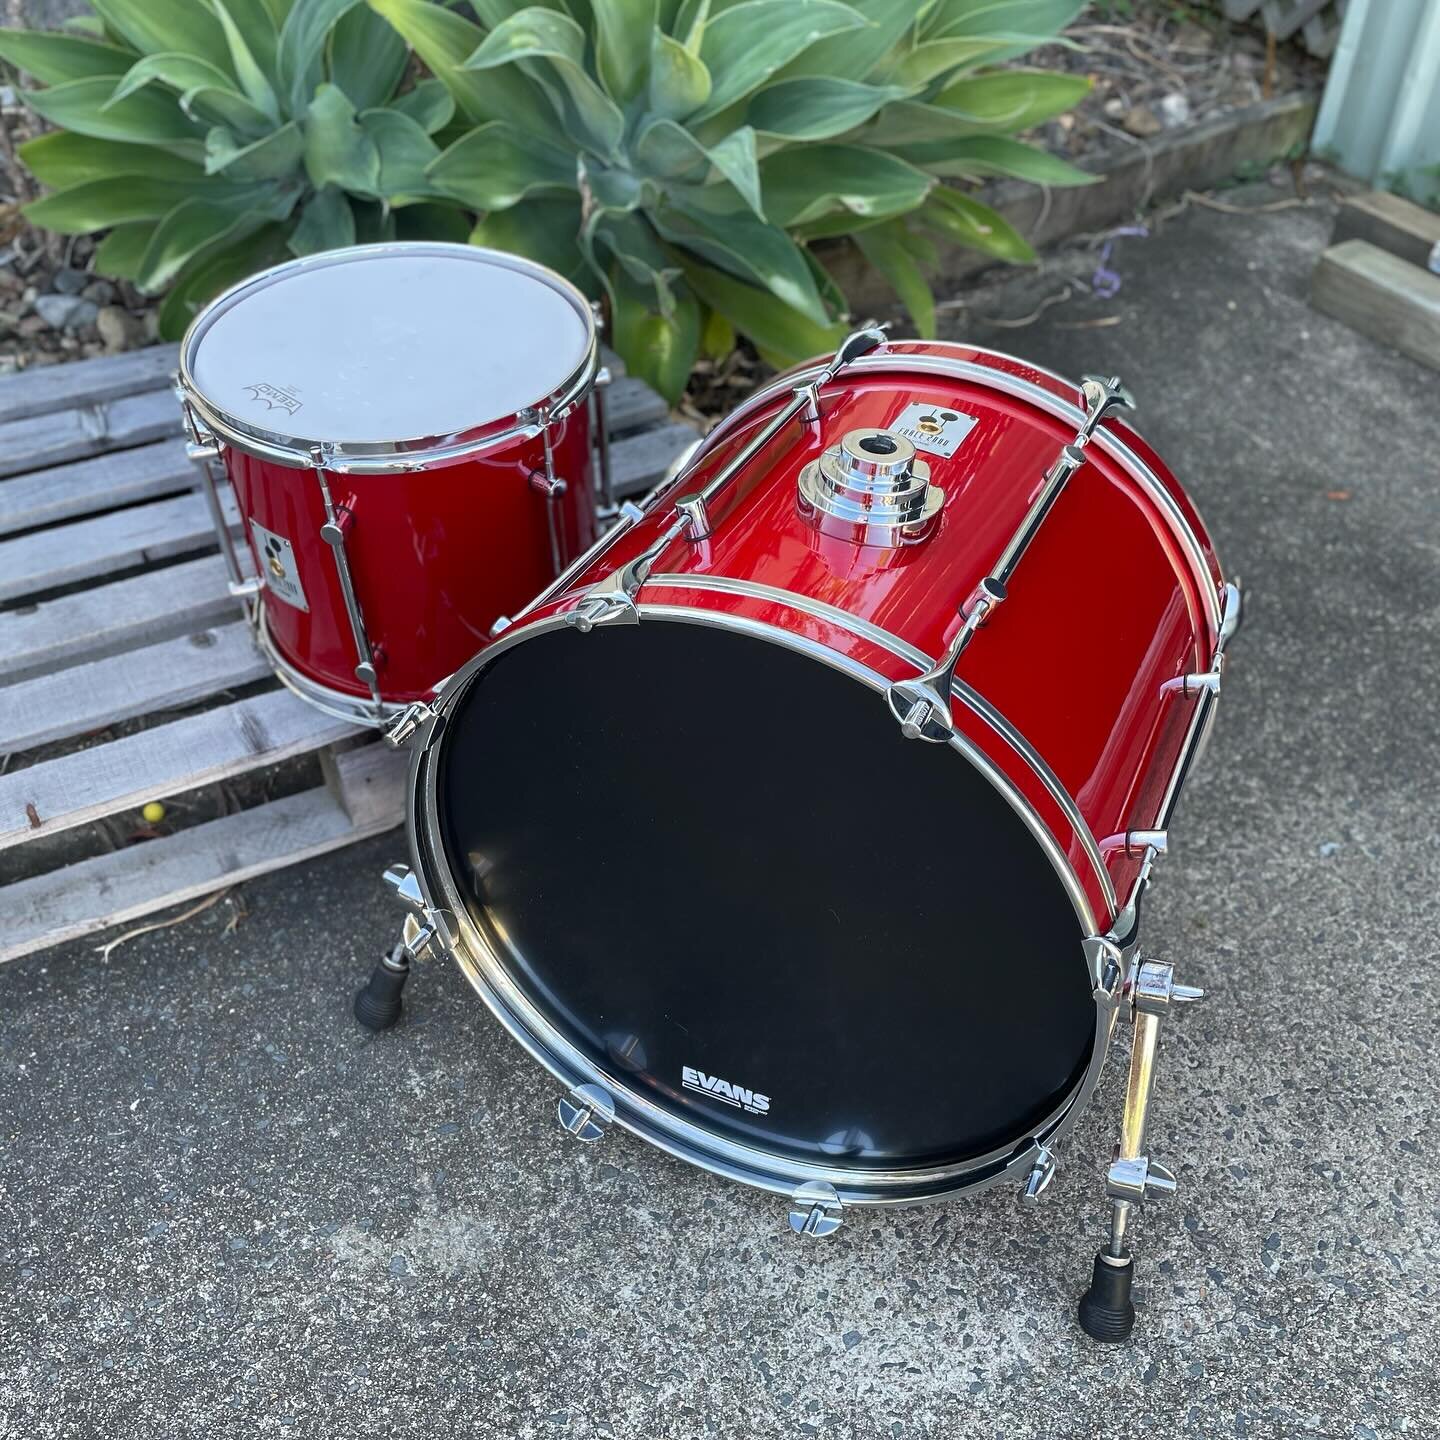 Sonor Force 2000 - 13&rdquo; tom + 20&rdquo; bass drum - in for a strip &amp; wrap in some fresh metallic red wrap along with all interiors refinished, bearing edges recut 45&deg;/45&deg; tom and 45&deg;/1/4&rdquo; roundover bass drum. All hardware c